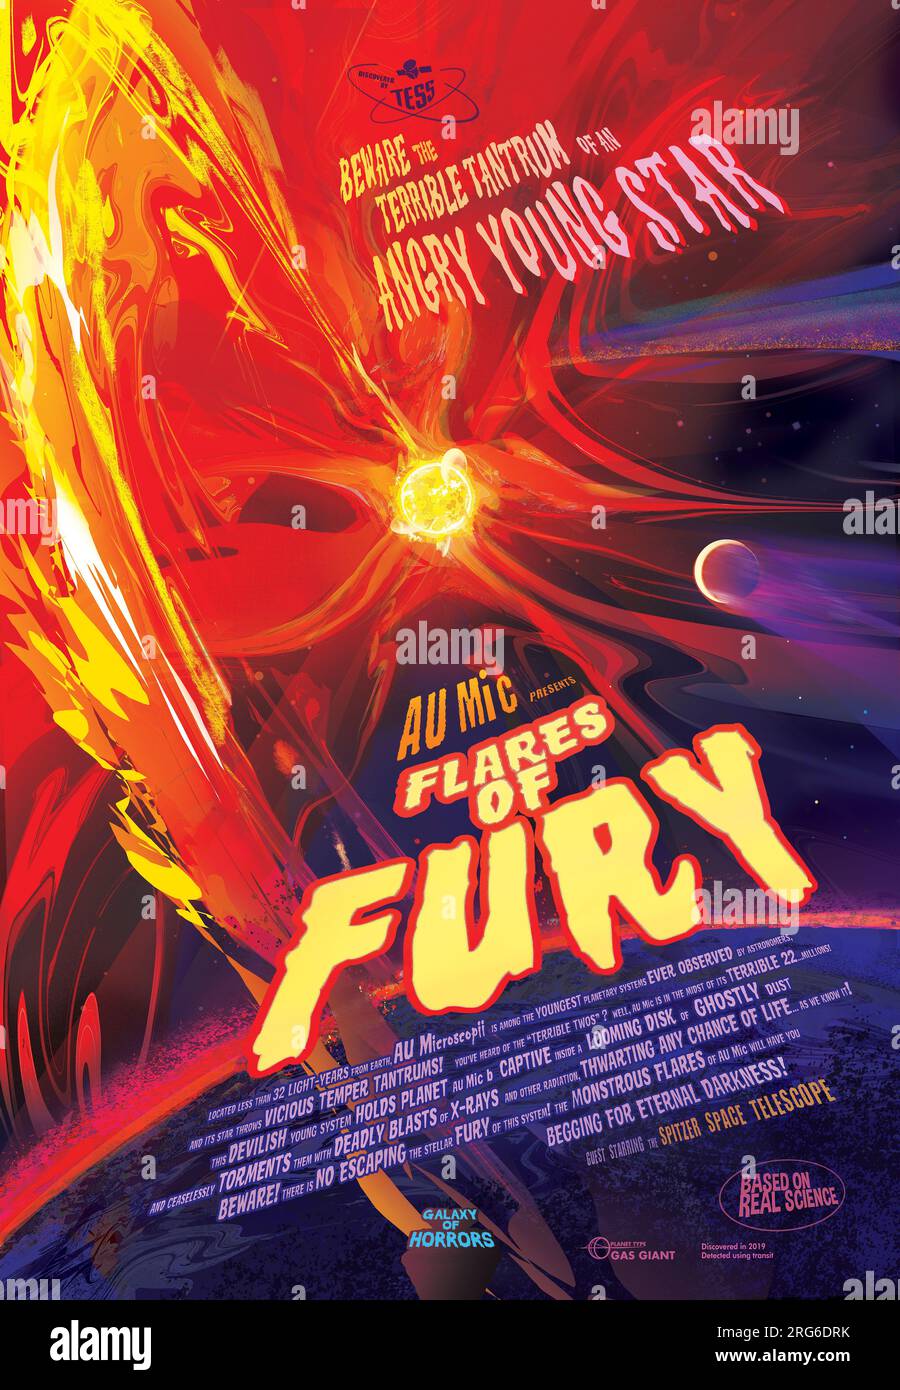 Flares of Fury Poster, au Microscopii. Banque D'Images